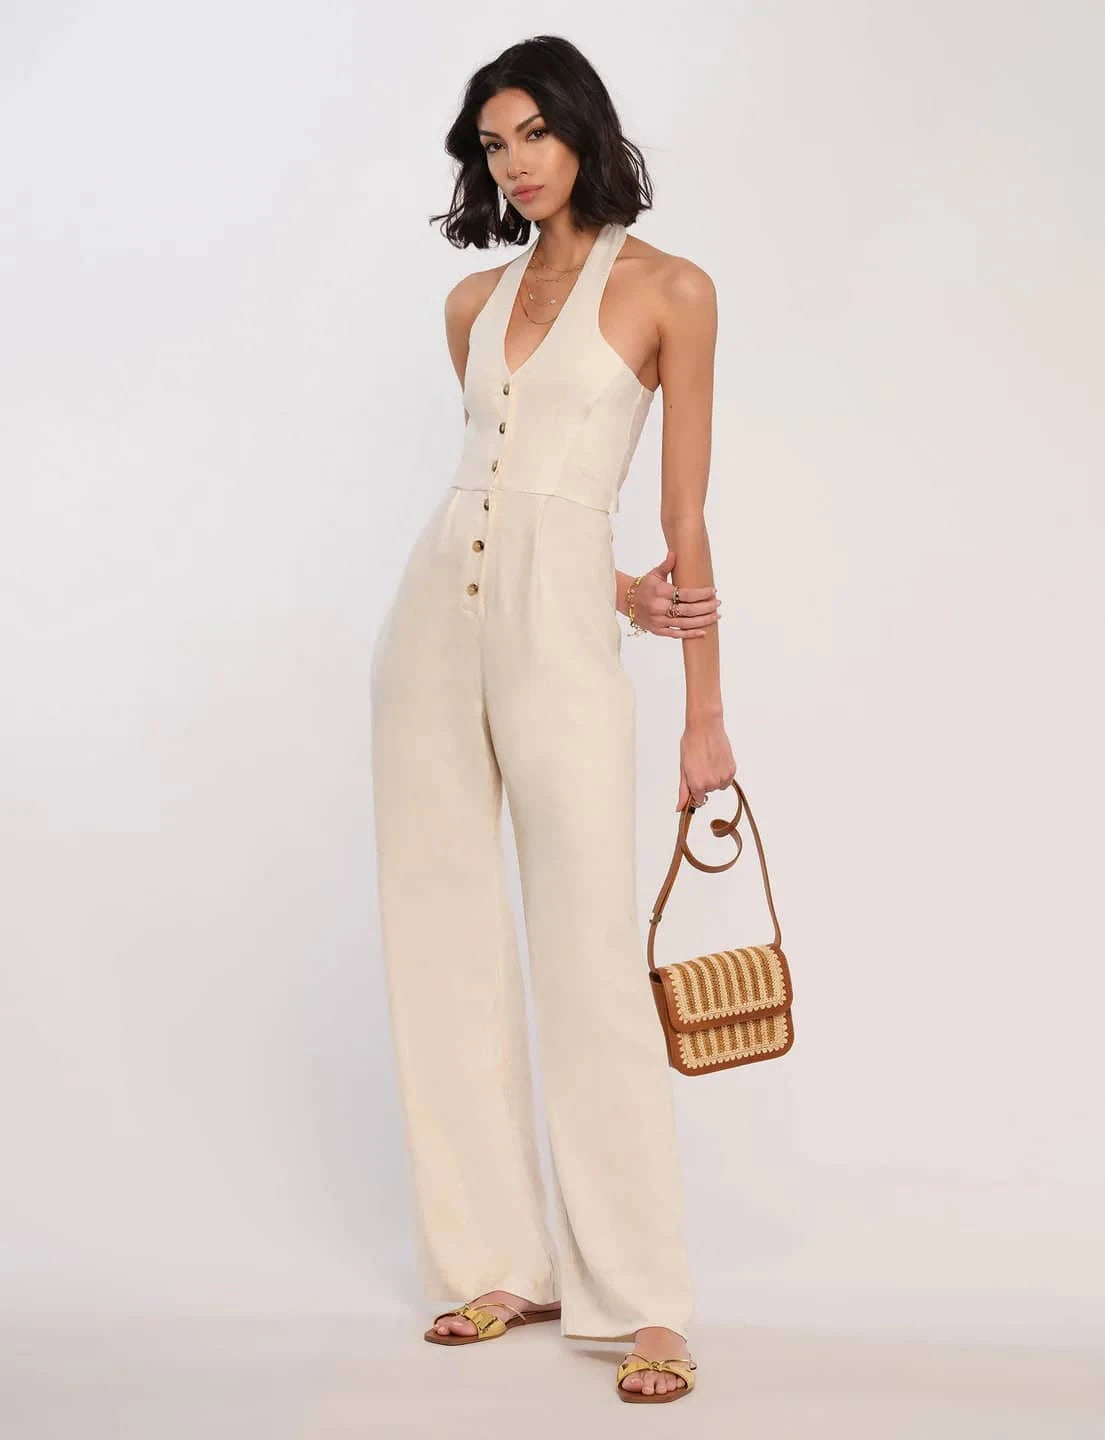 Heartloom_00402_244re2a_kolina_jumpsuit_A_front_1120x1440_12ee2ee9-ff10-447c-a520-14ae9324d0b5.webp